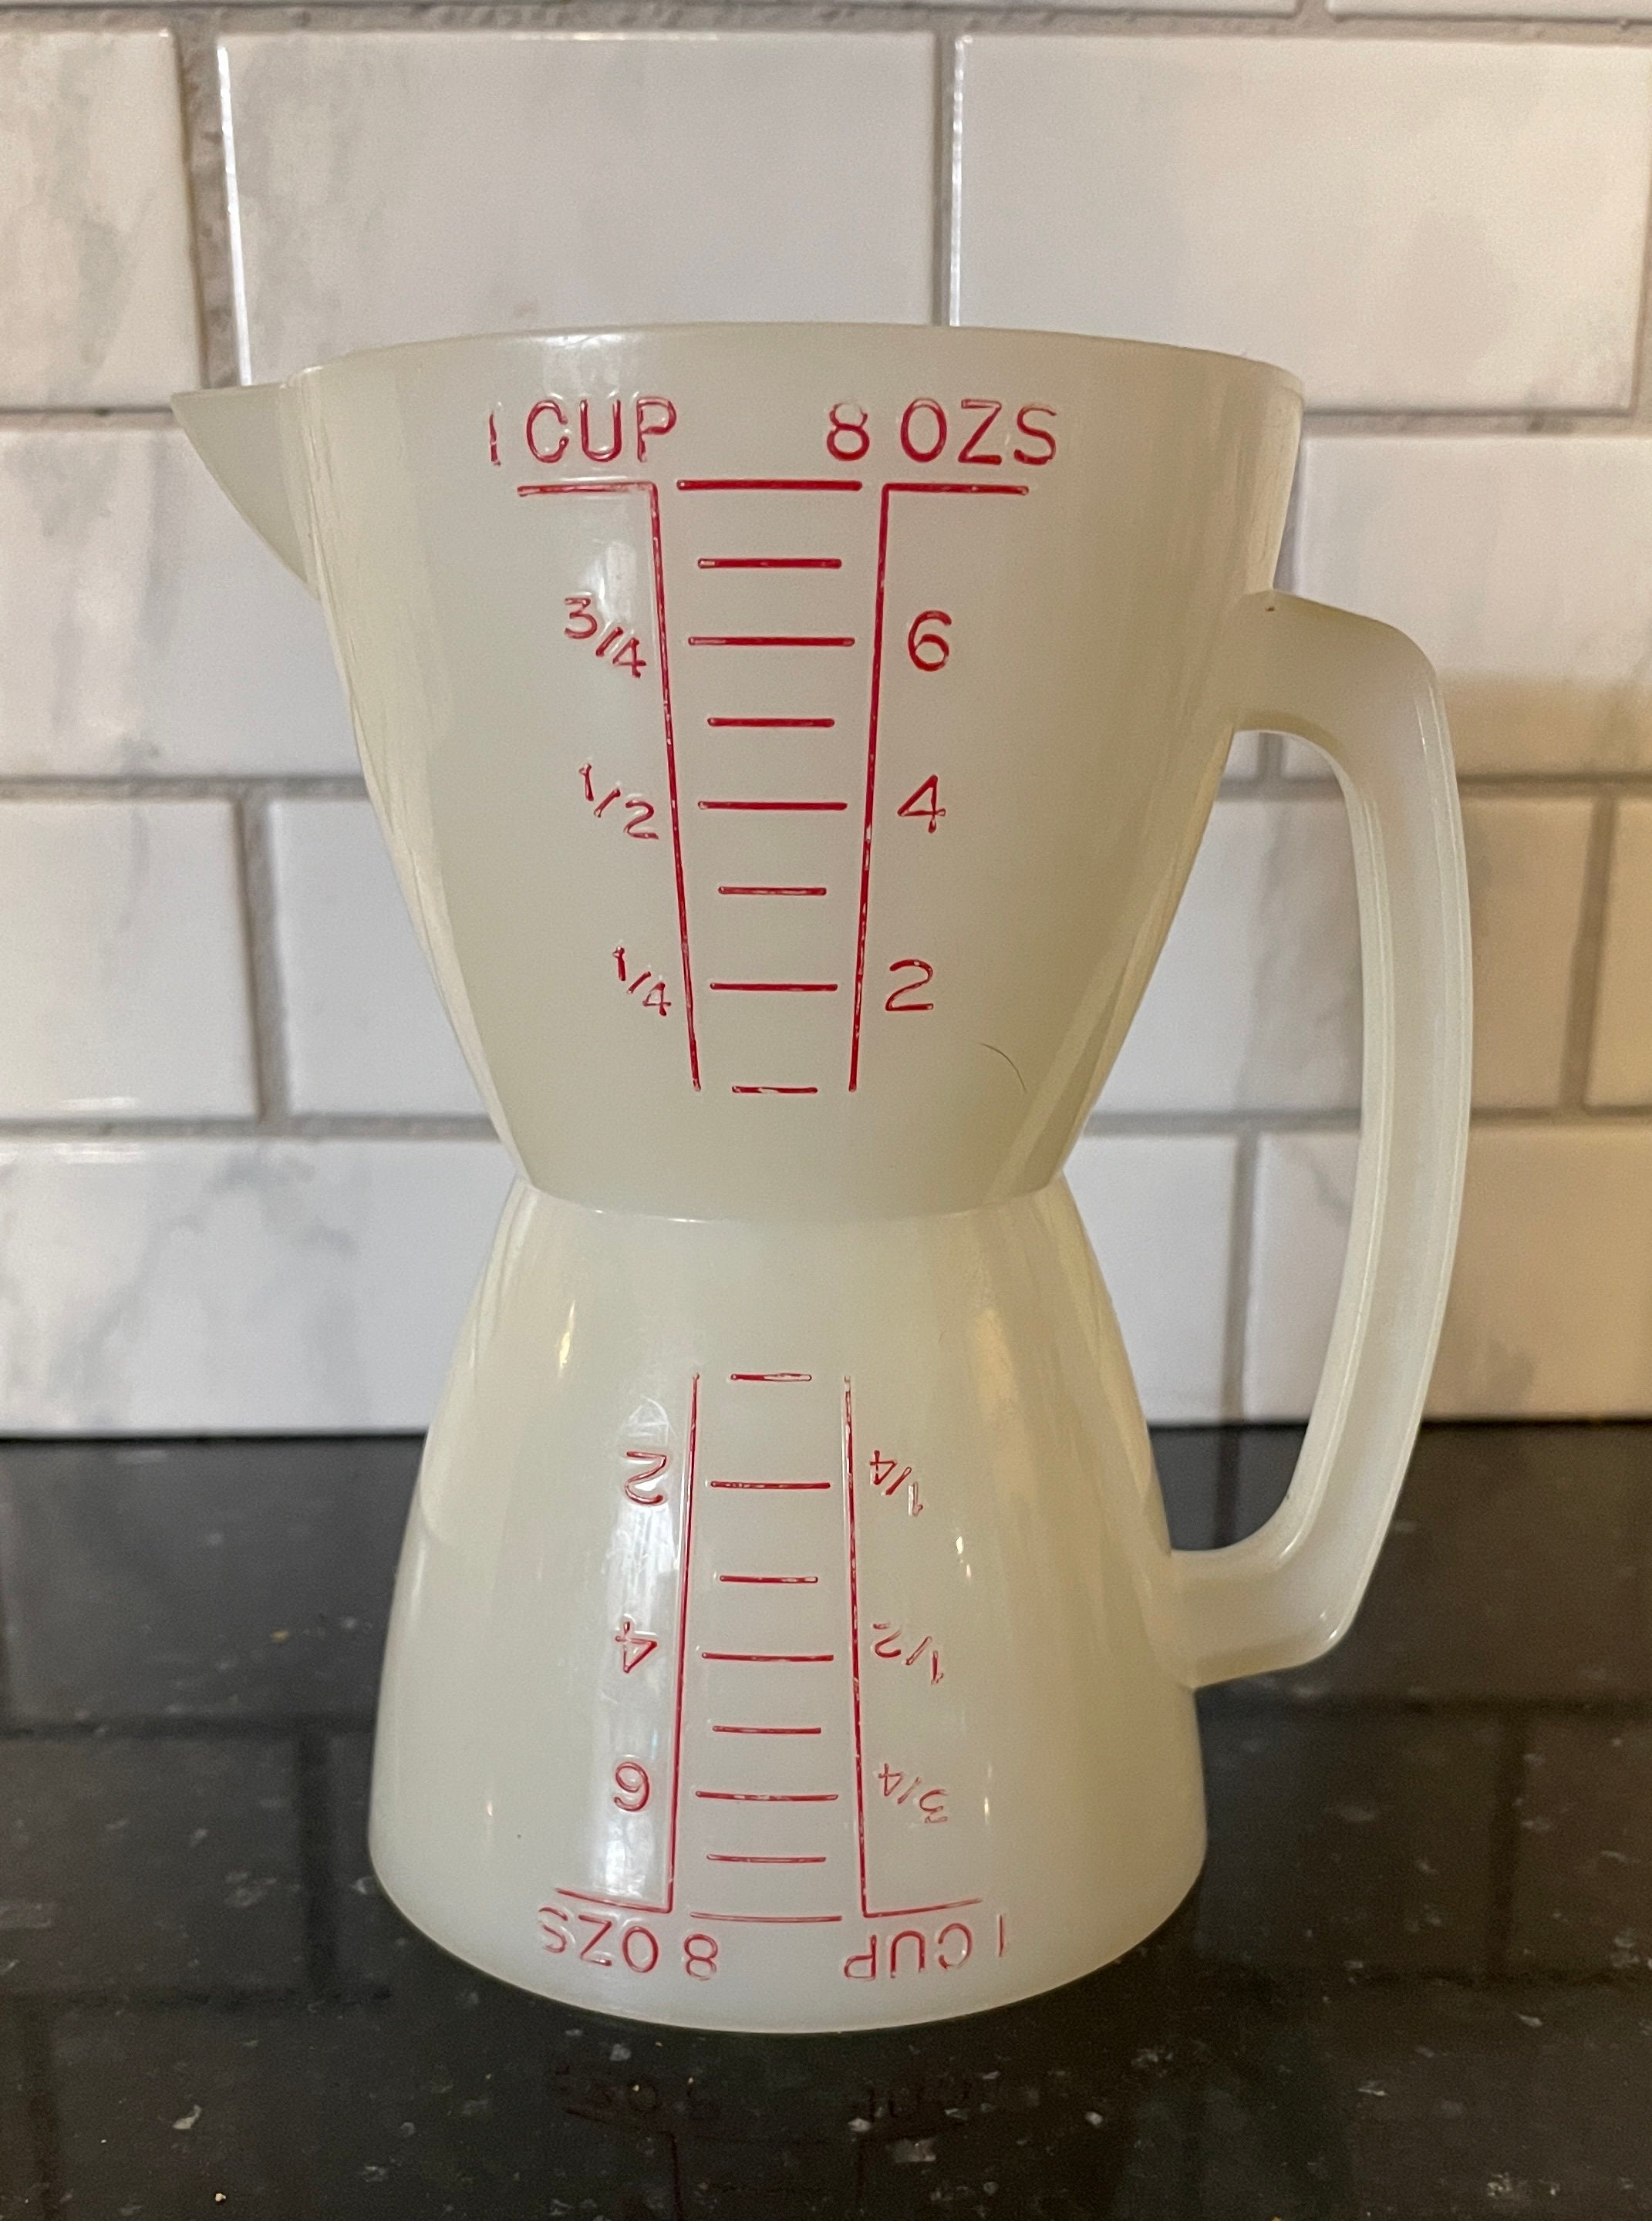 Pyrex 8 cup liquid measuring glass - Lombard pick up only for Sale